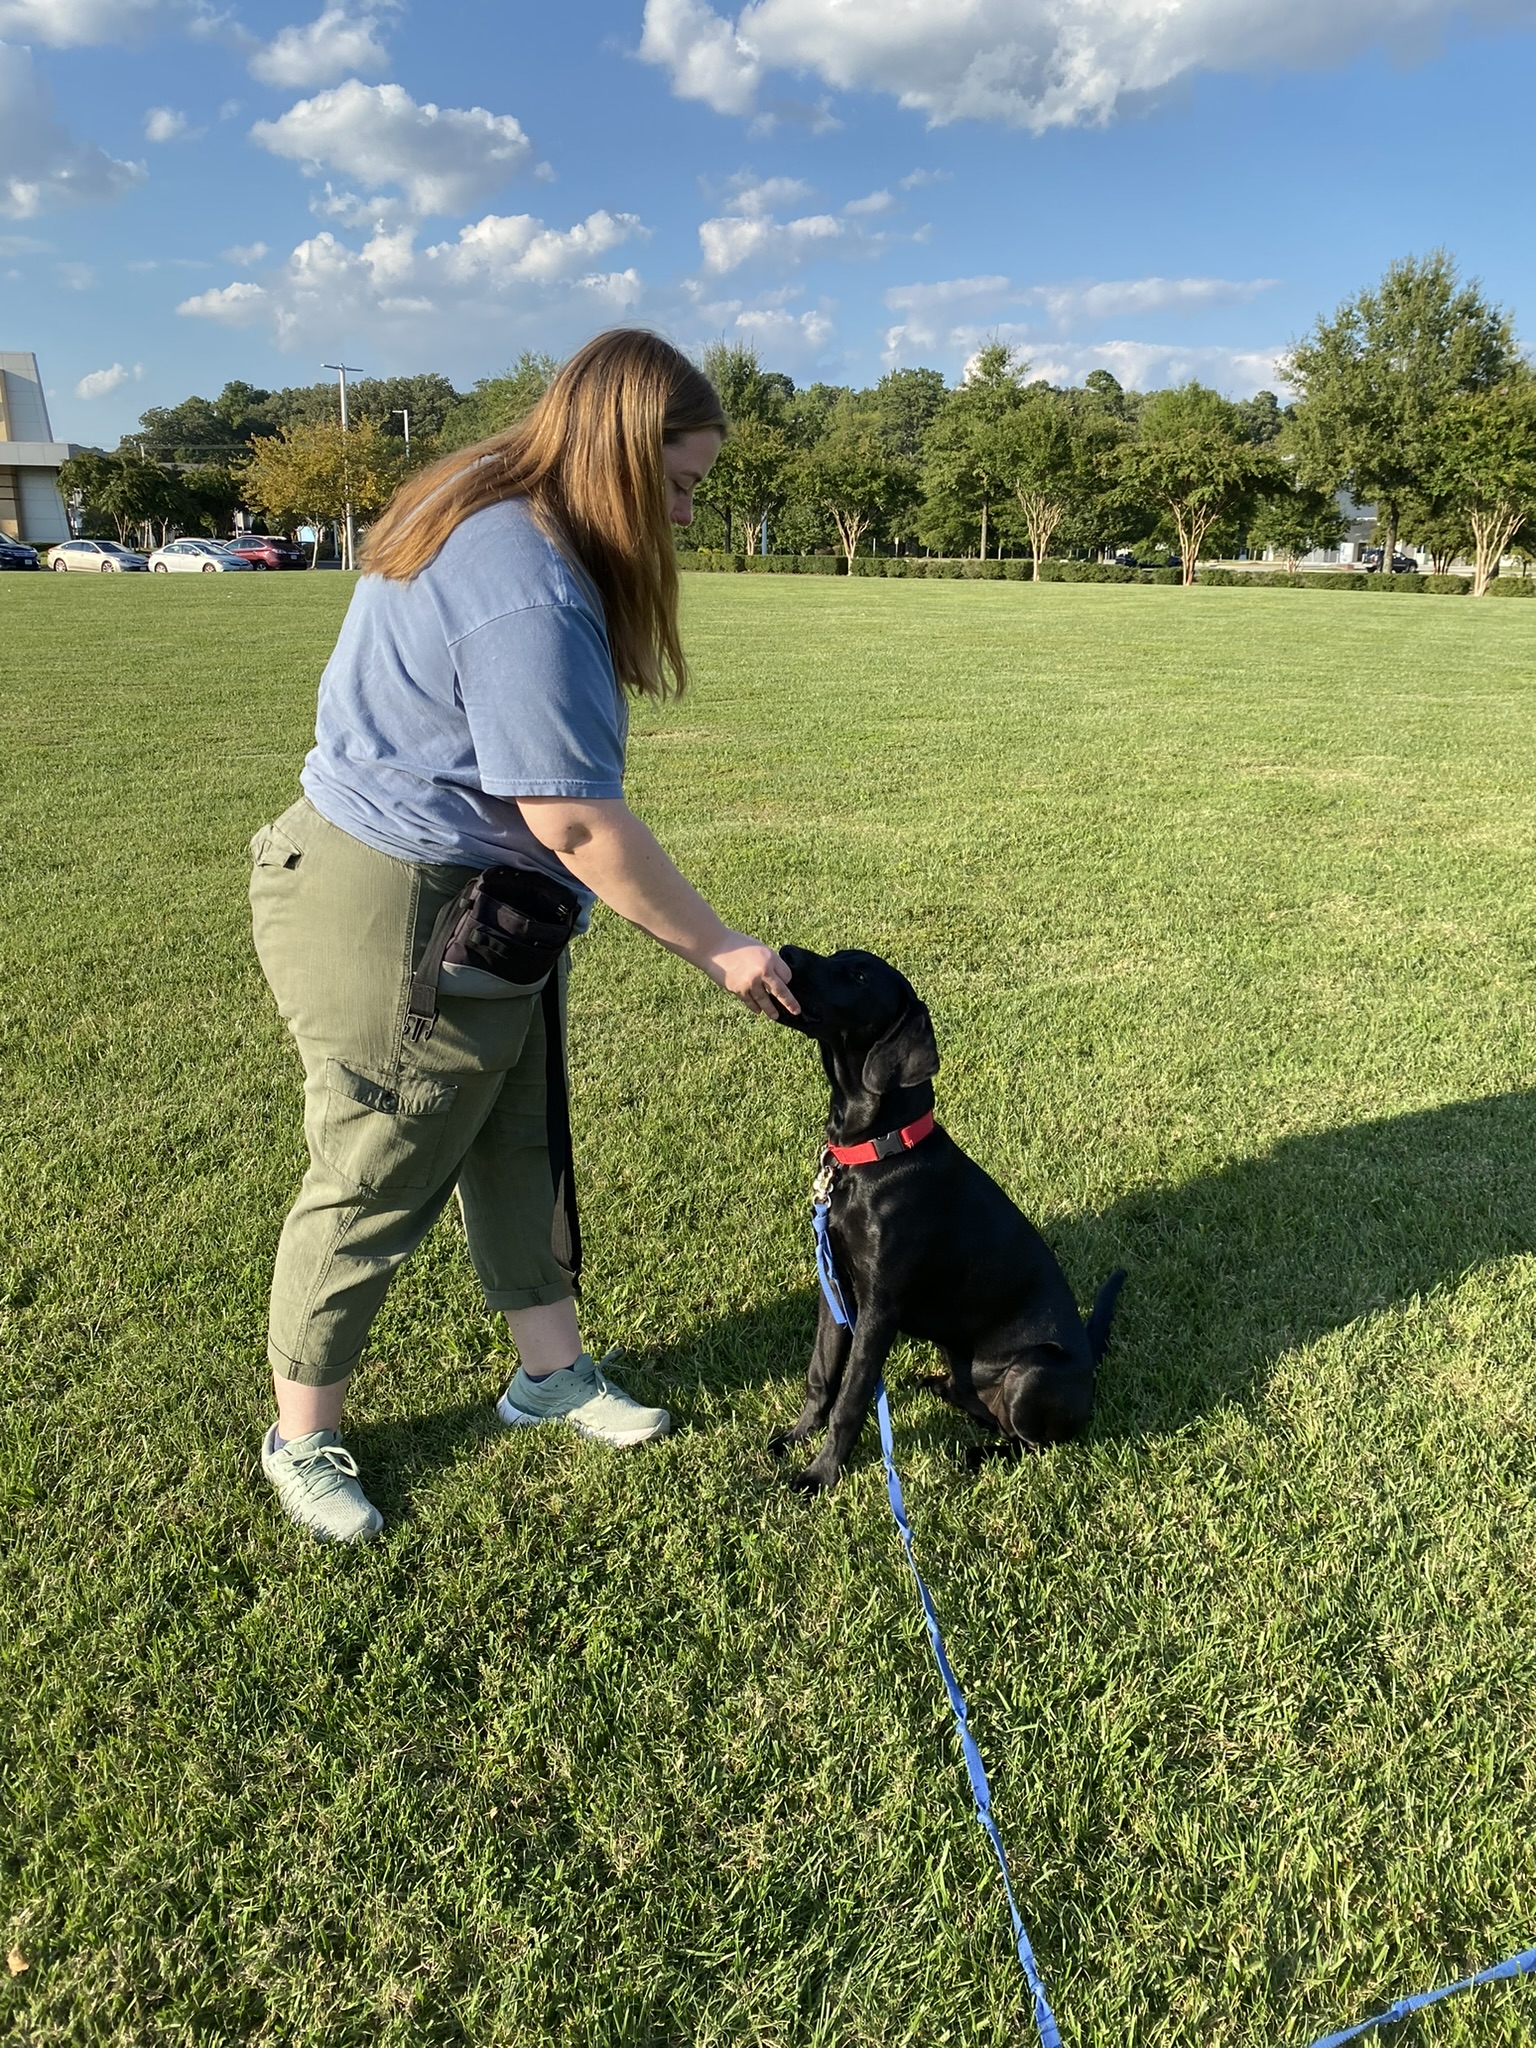 Black Weimaraner/ Golden Mix being trained at Greenbriar Park In Chesapeake by certified dog trainer Cate